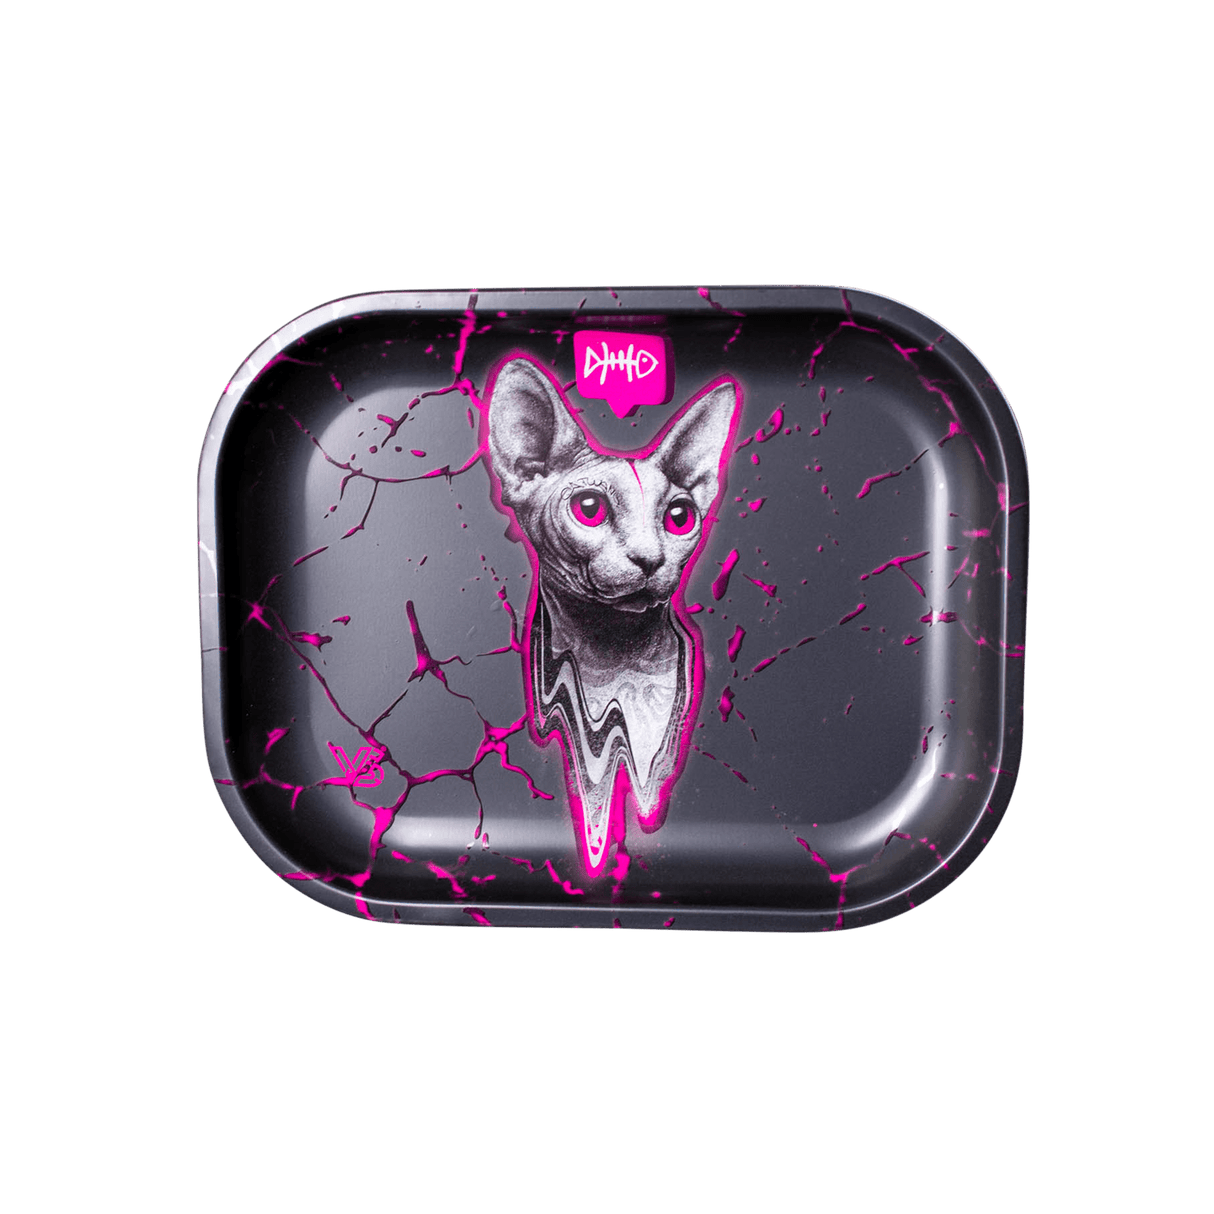 V Syndicate The Stray Metal Rollin' Tray with Pink and Black Cat Design - Top View